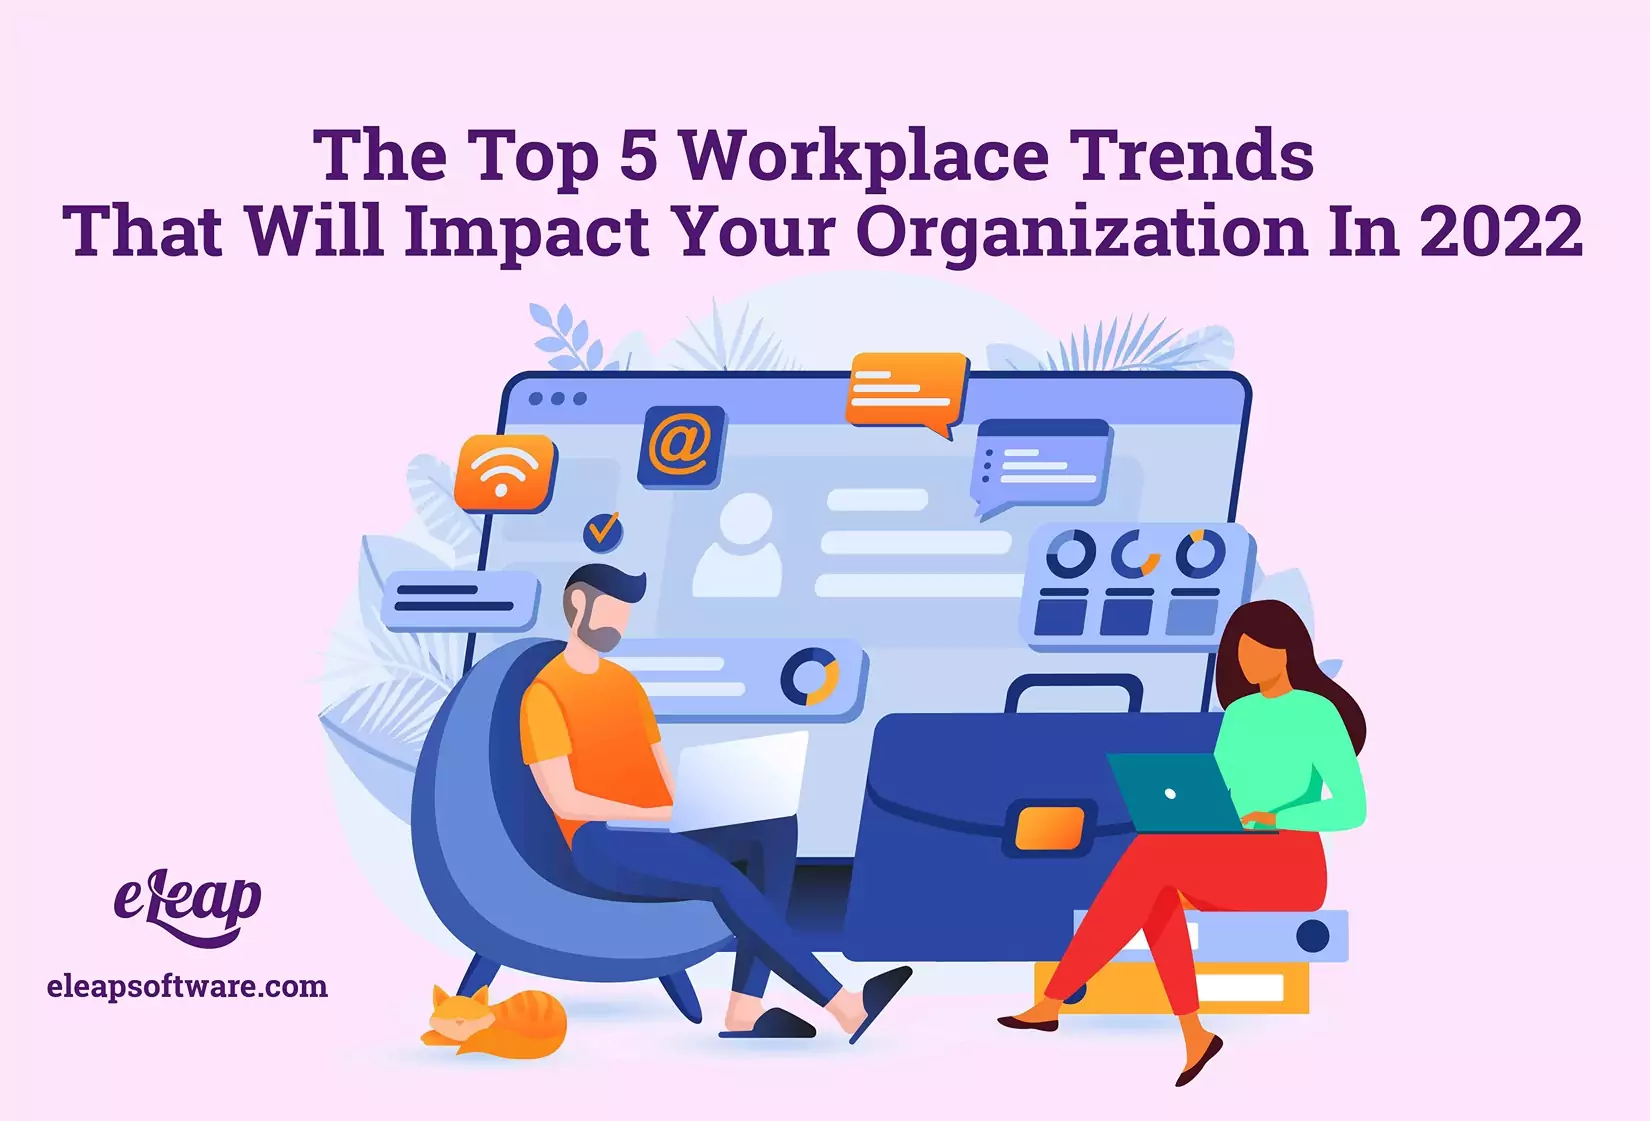 The Top 5 Workplace Trends That Will Impact Your Organization In 2022